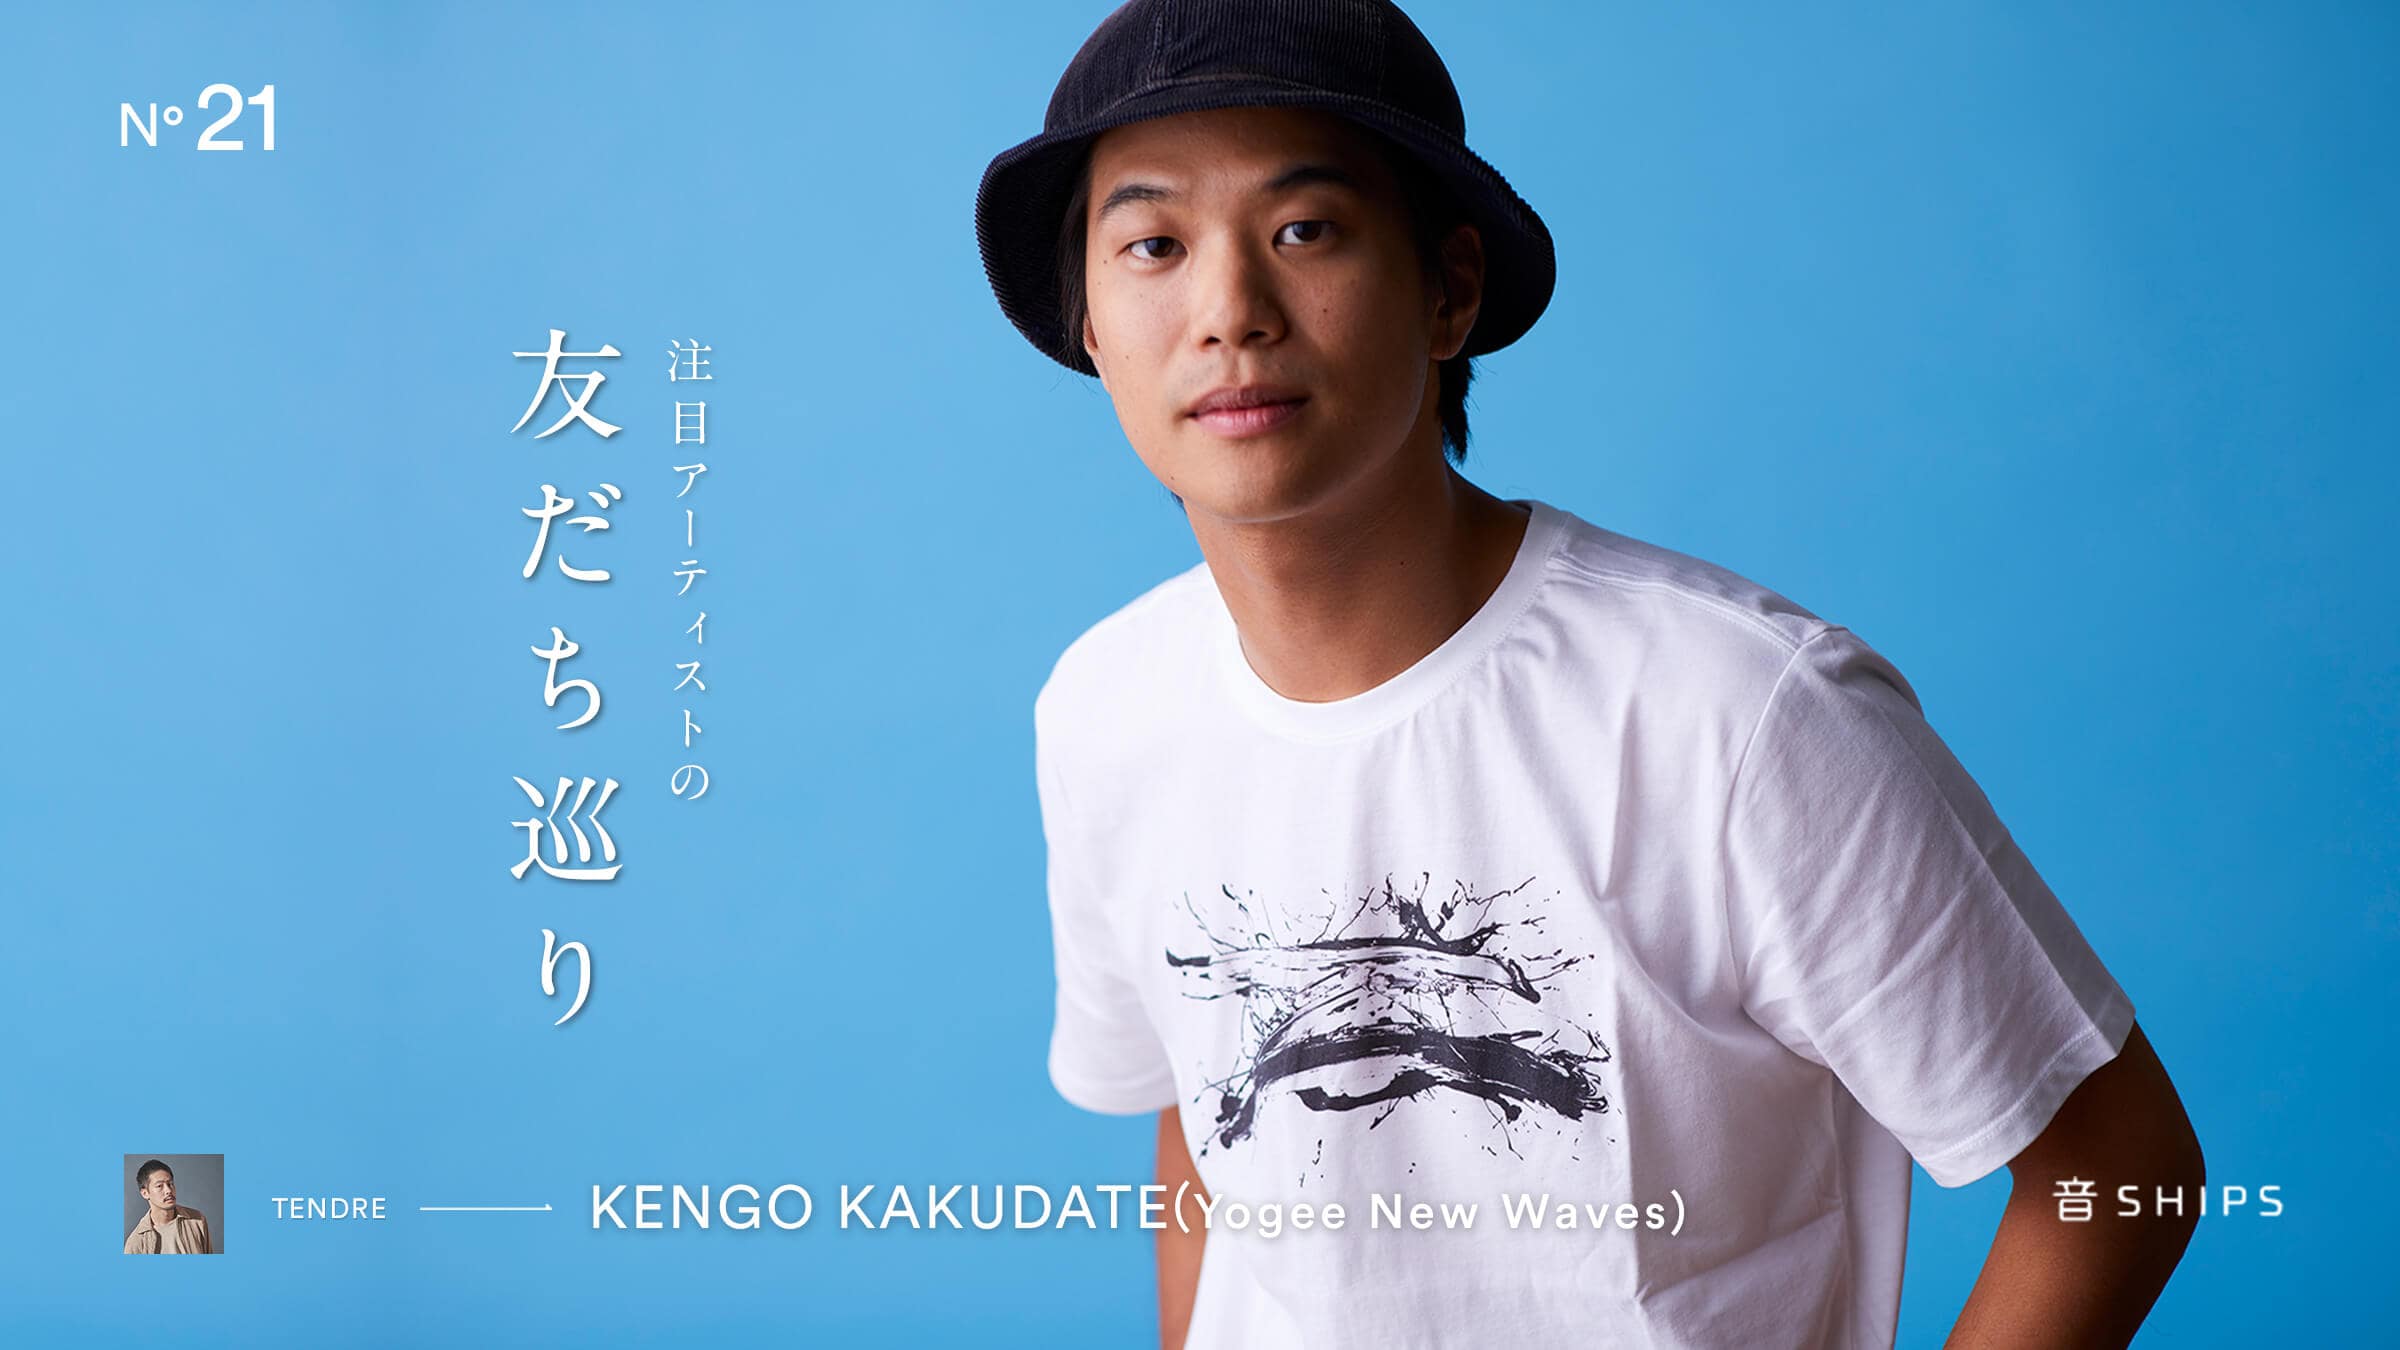 Yogee New Waves（ヨギー ニュー ウェイブス） 角舘健悟編－音SHIPS ...